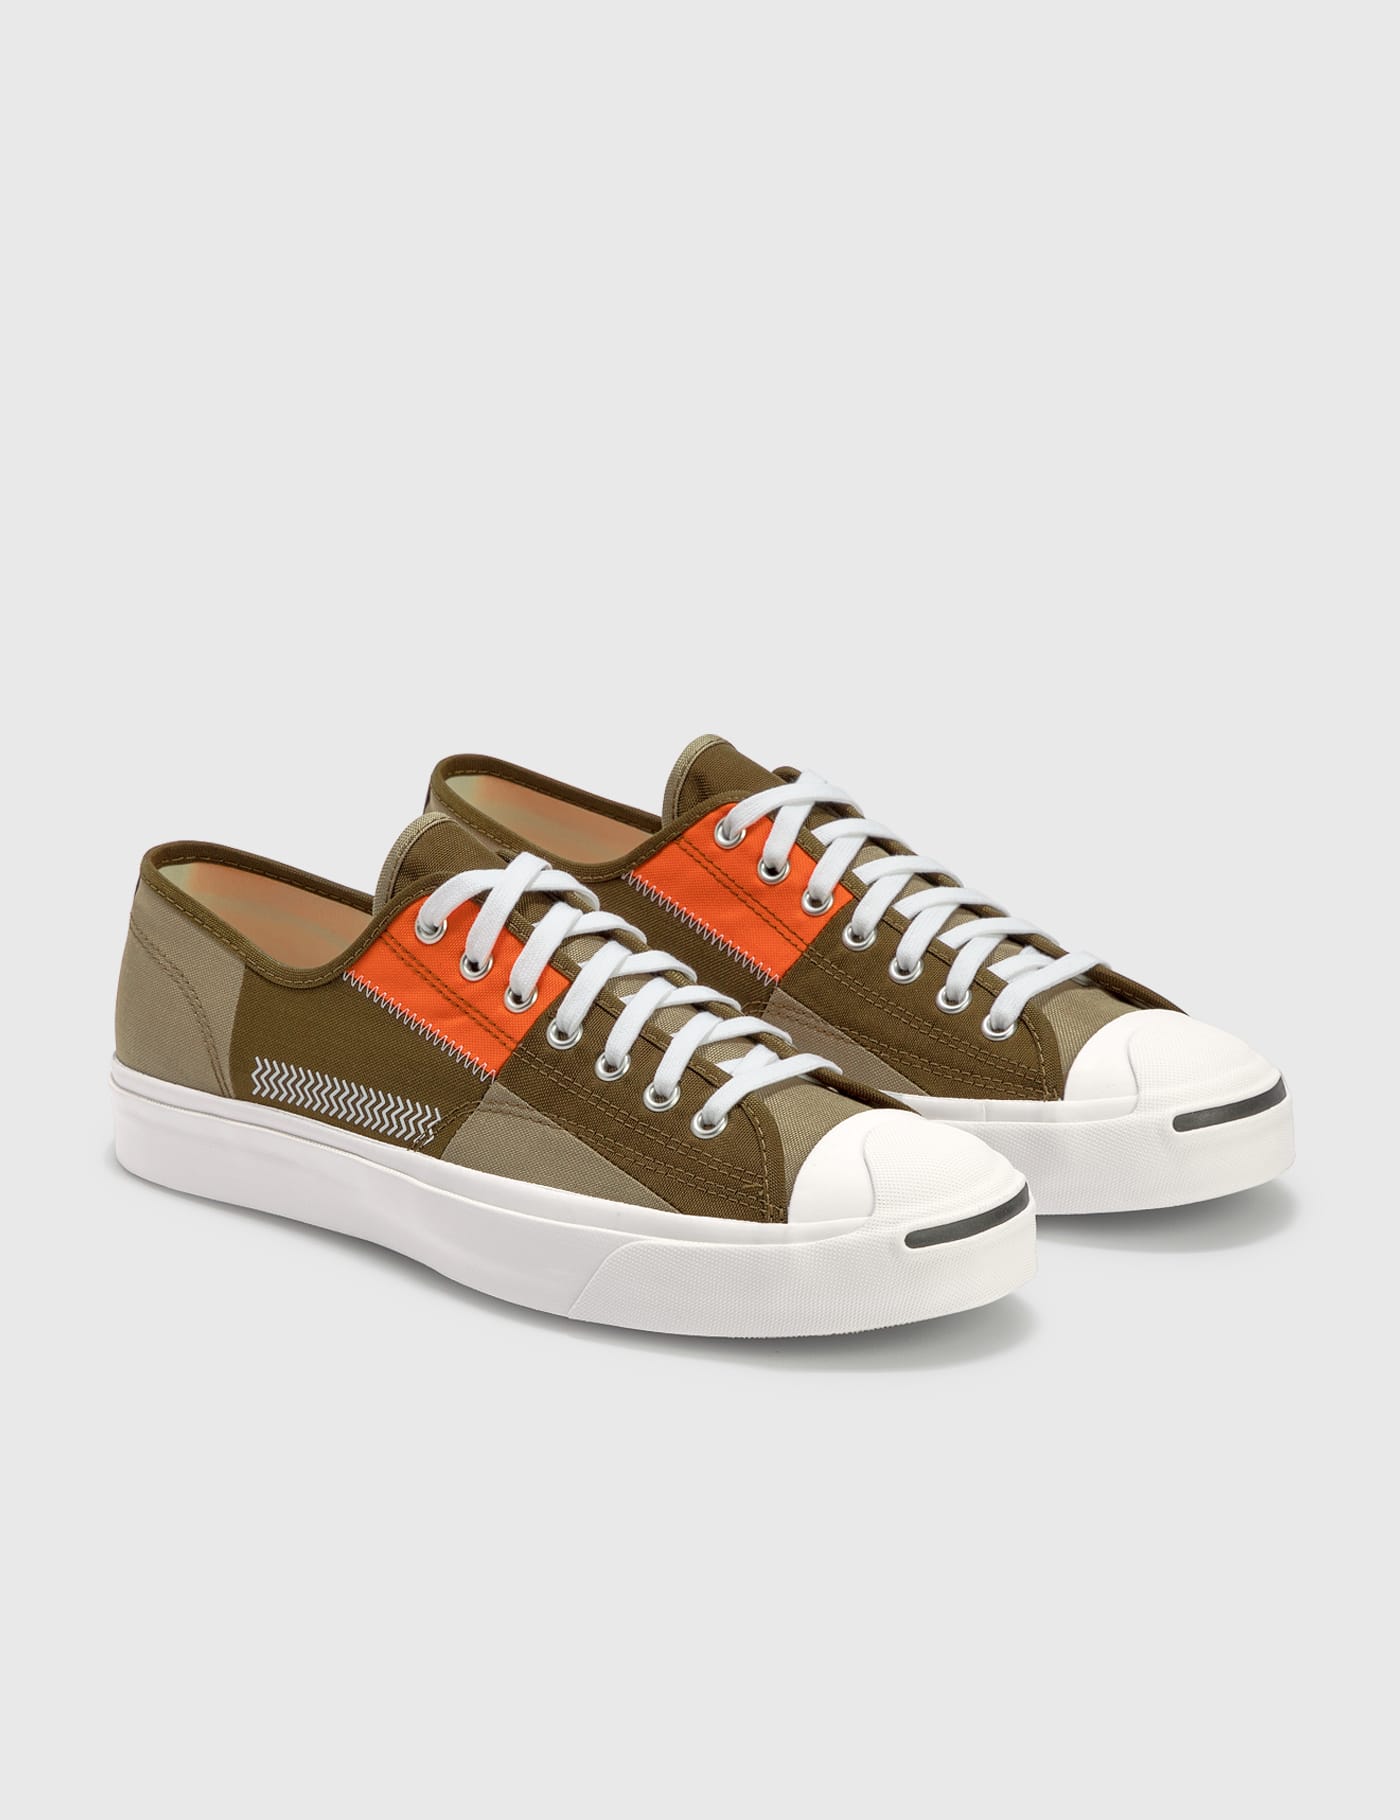 jack purcell colors